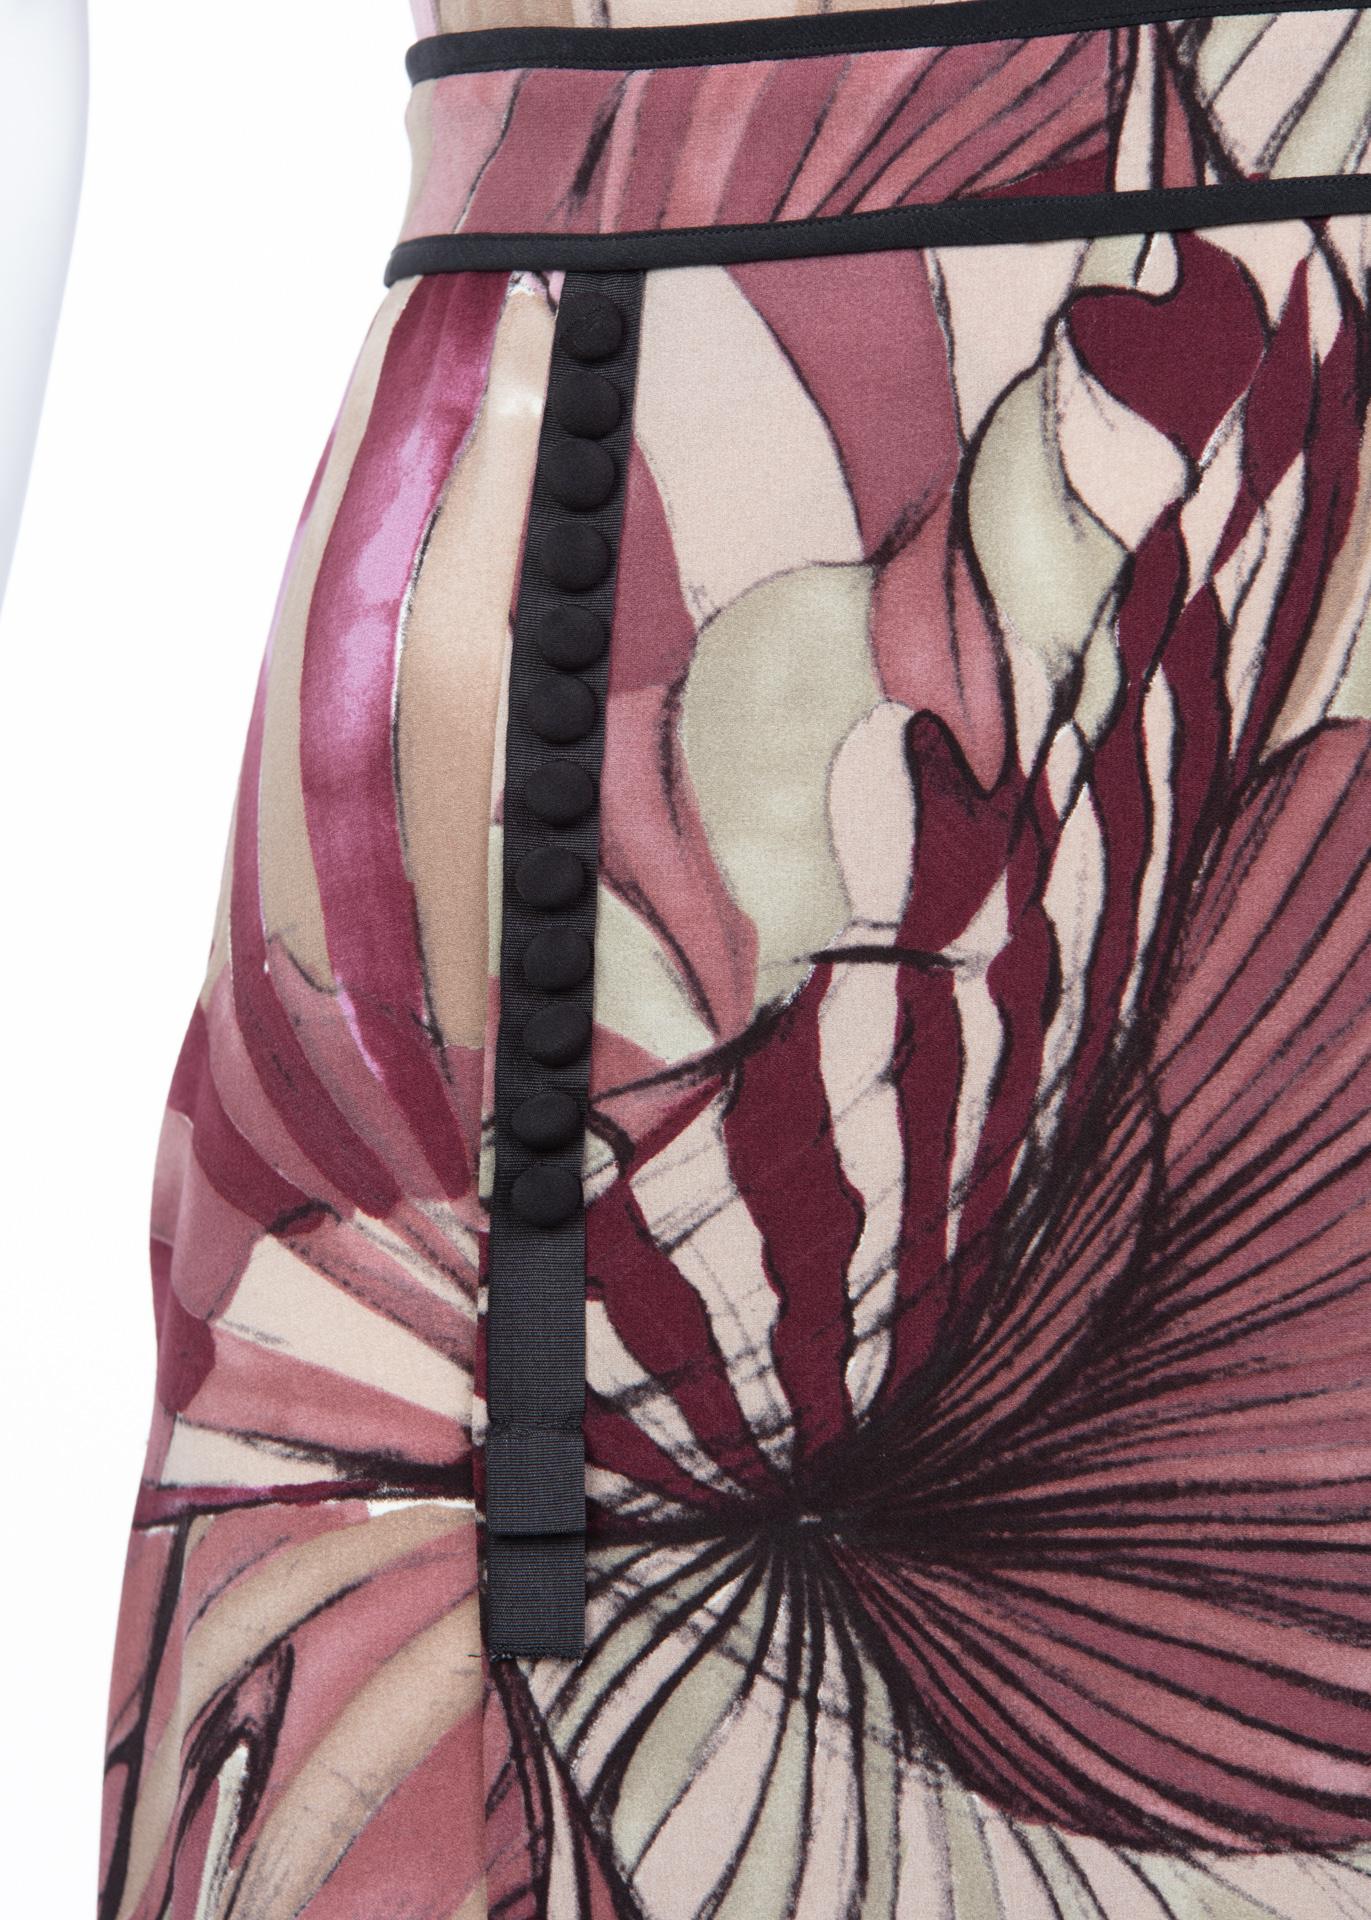 2008 Prada James Jean Fairy Collection Pink Print Silk Dress In Excellent Condition For Sale In Boca Raton, FL